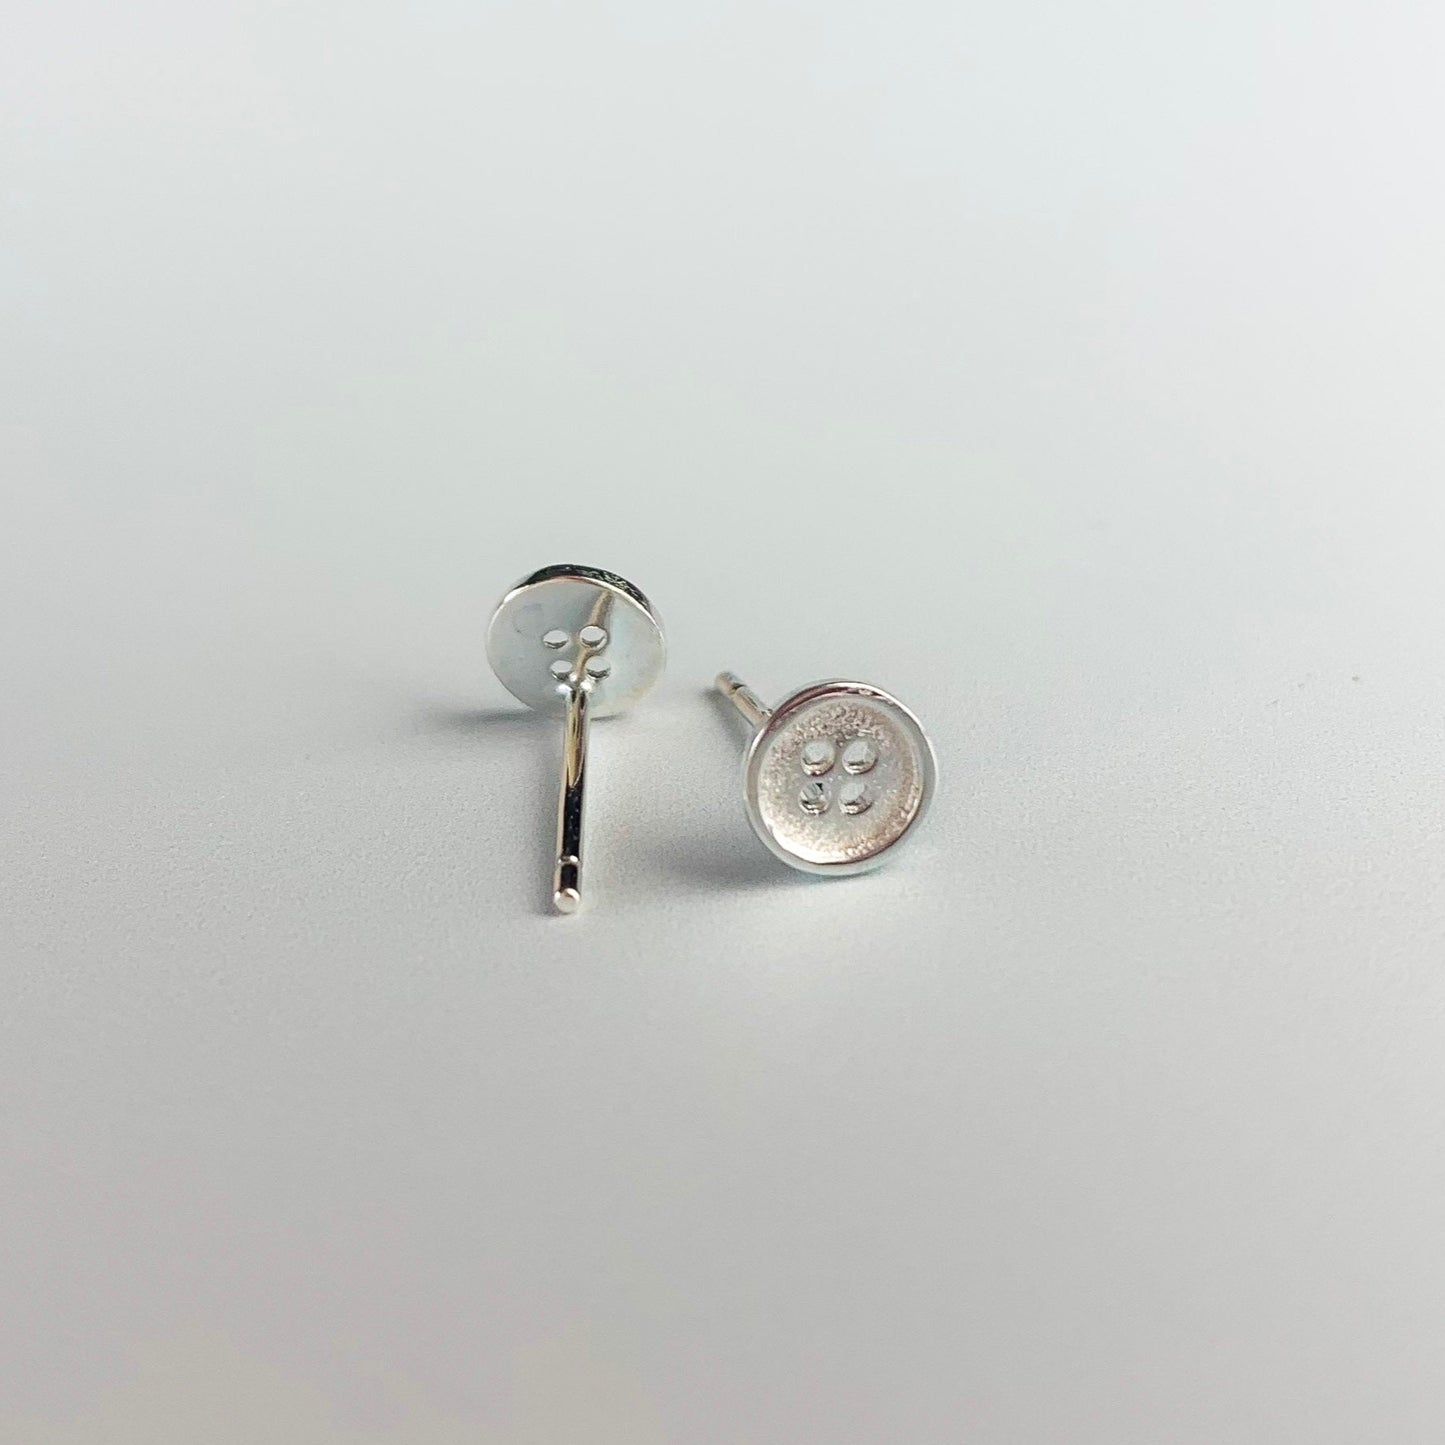 Tiny Button Stud Earrings